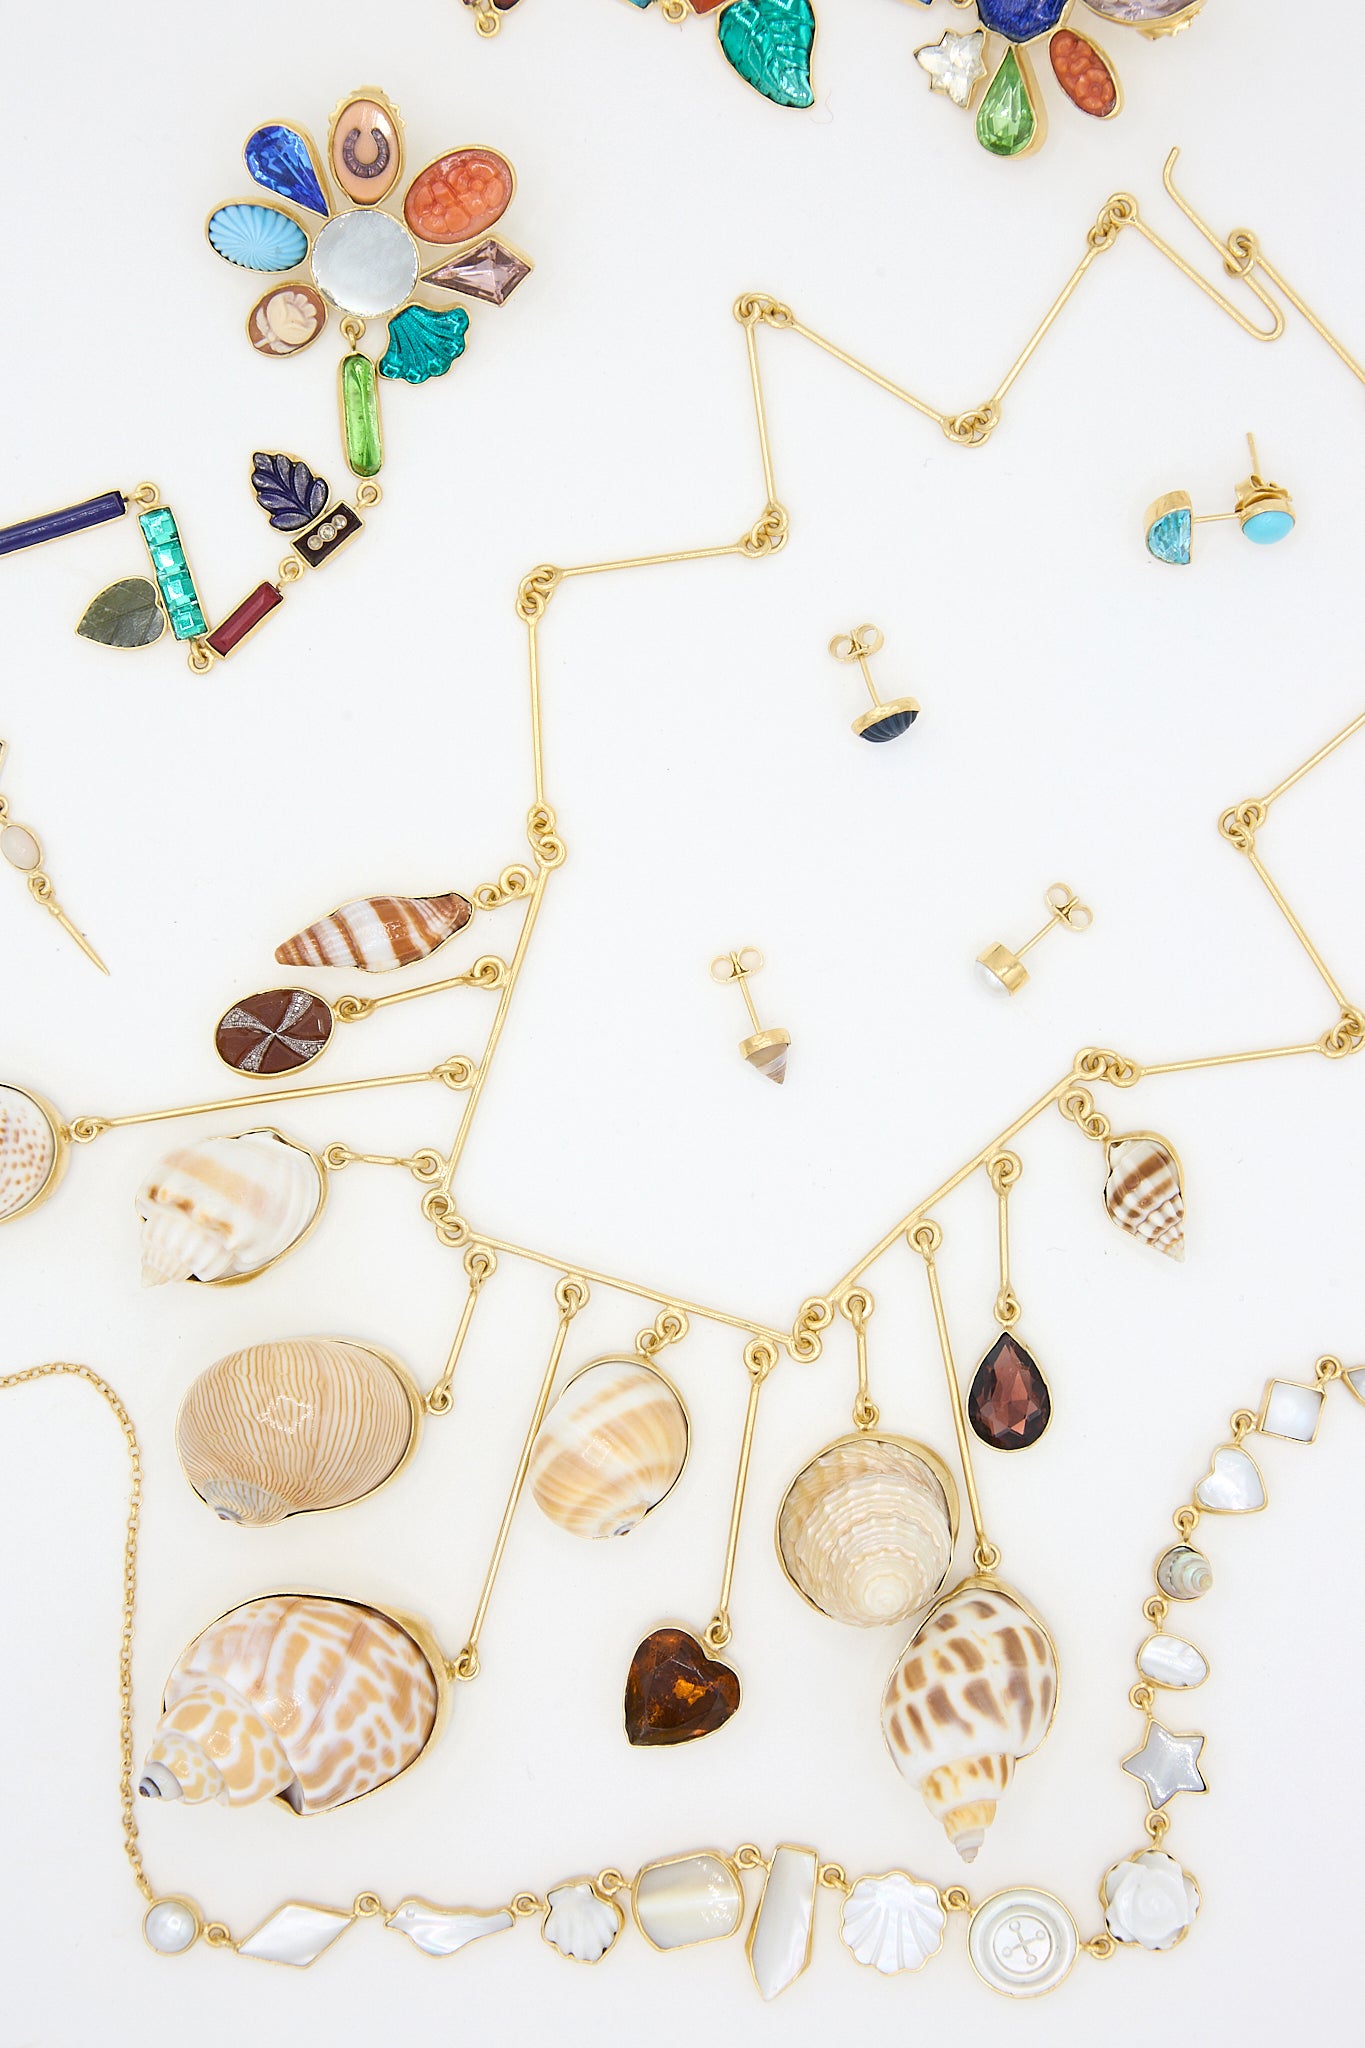 A collection of necklaces, earrings, and shells featuring the Grainne Morton Five Charm with Victorian Drop Earrings in 18k gold-plated silver.